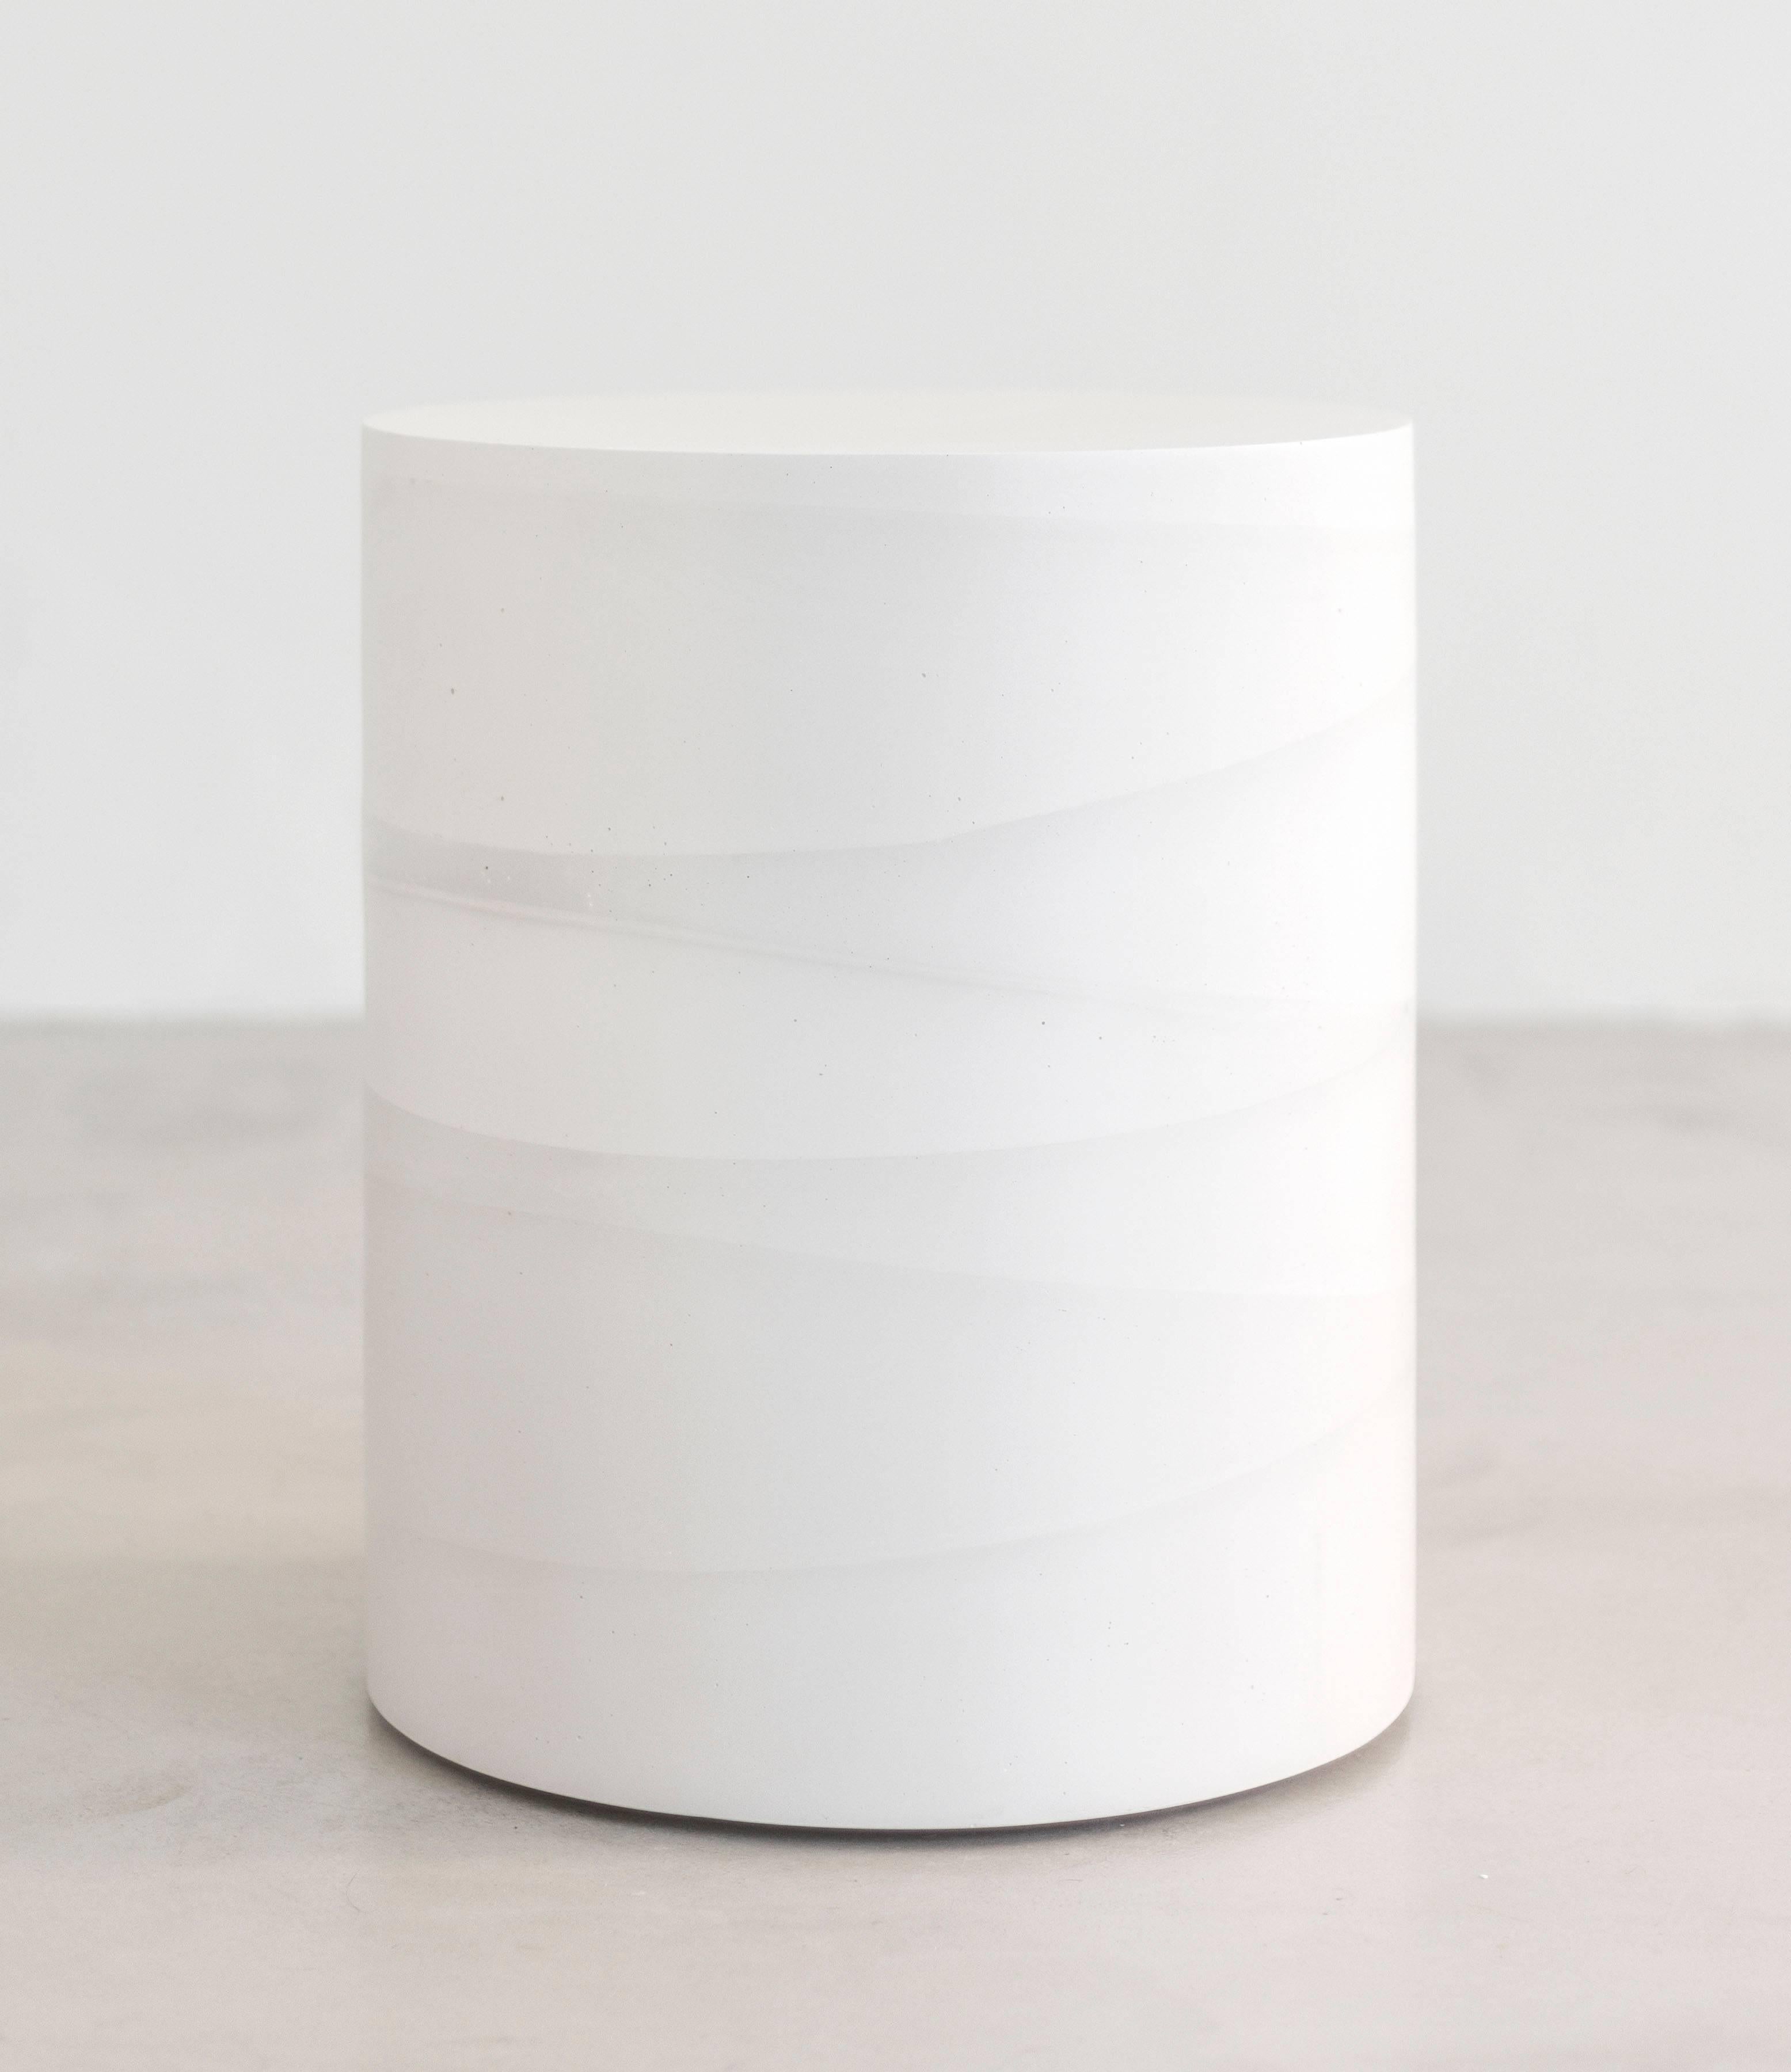 An exploration in the softness and subtly of the materials, the made-to-order drum has a hollow cavity and is cast entirely from hand-dyed cement. Poured in individual hand-dyed layers of white cement, the simple geometric form creates a light ombre